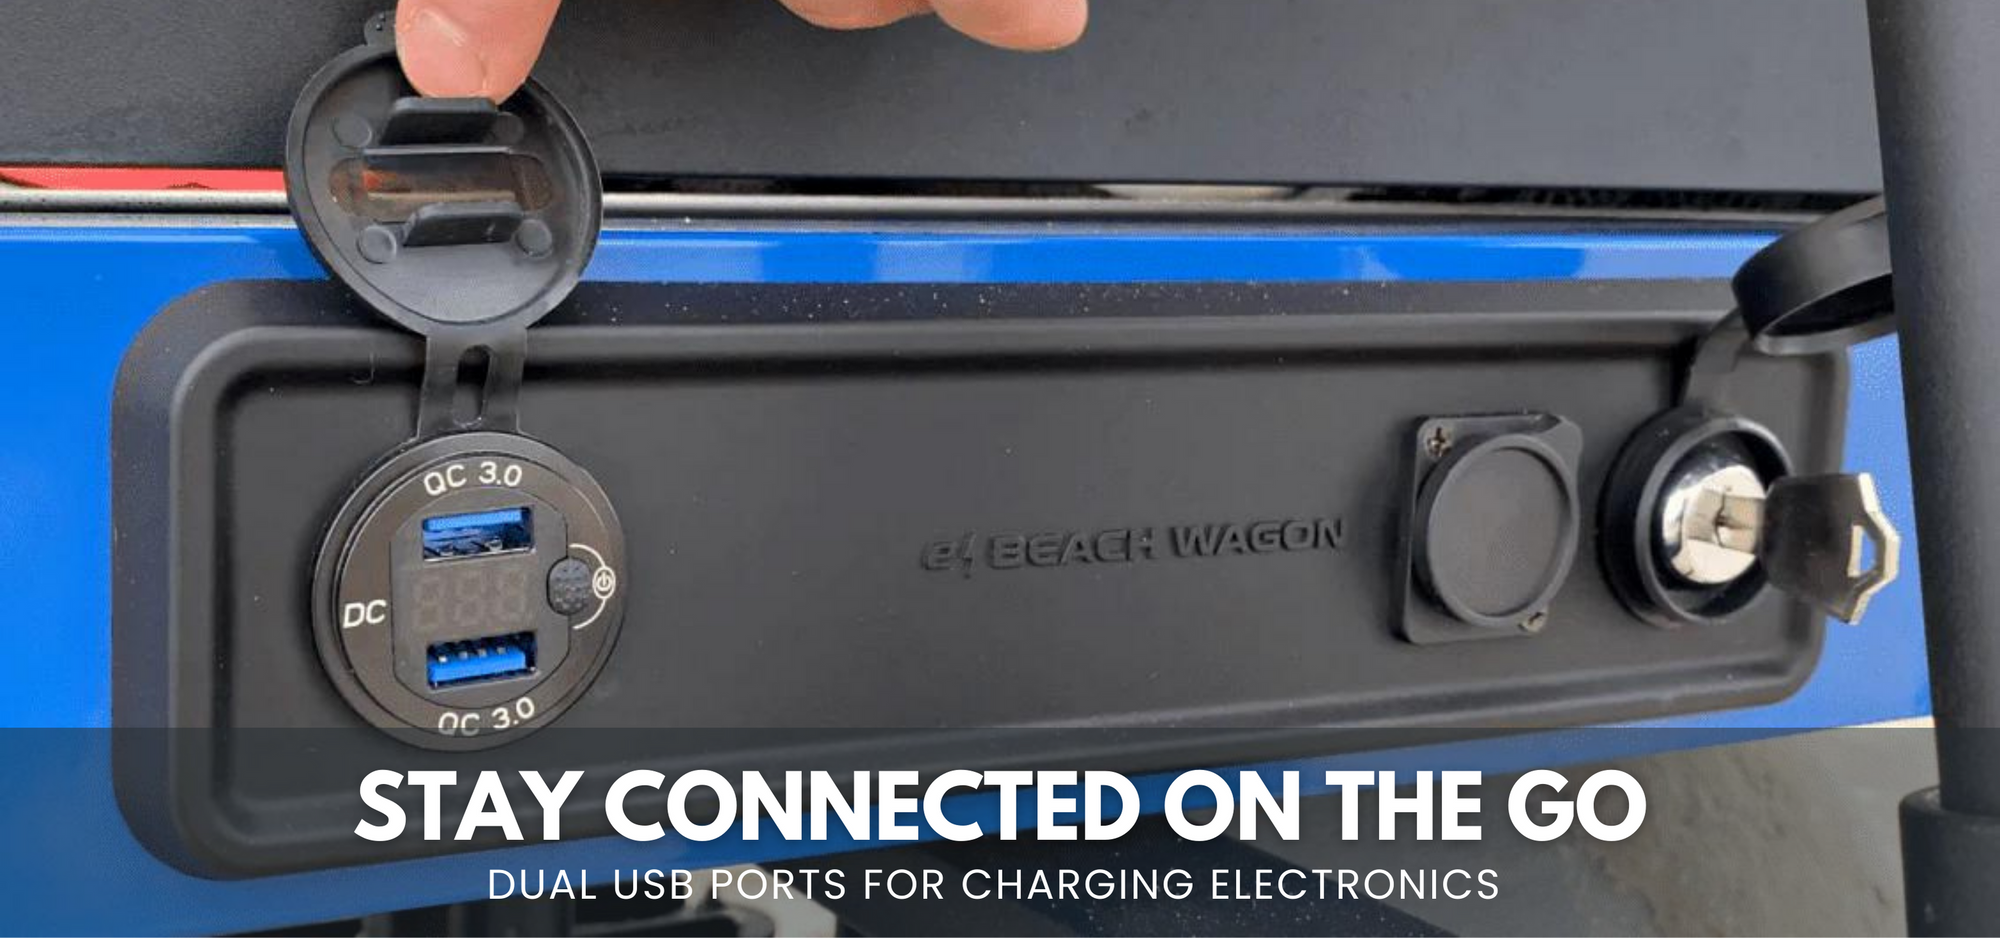 Charge multiple electronics with an e-Beach Wagon